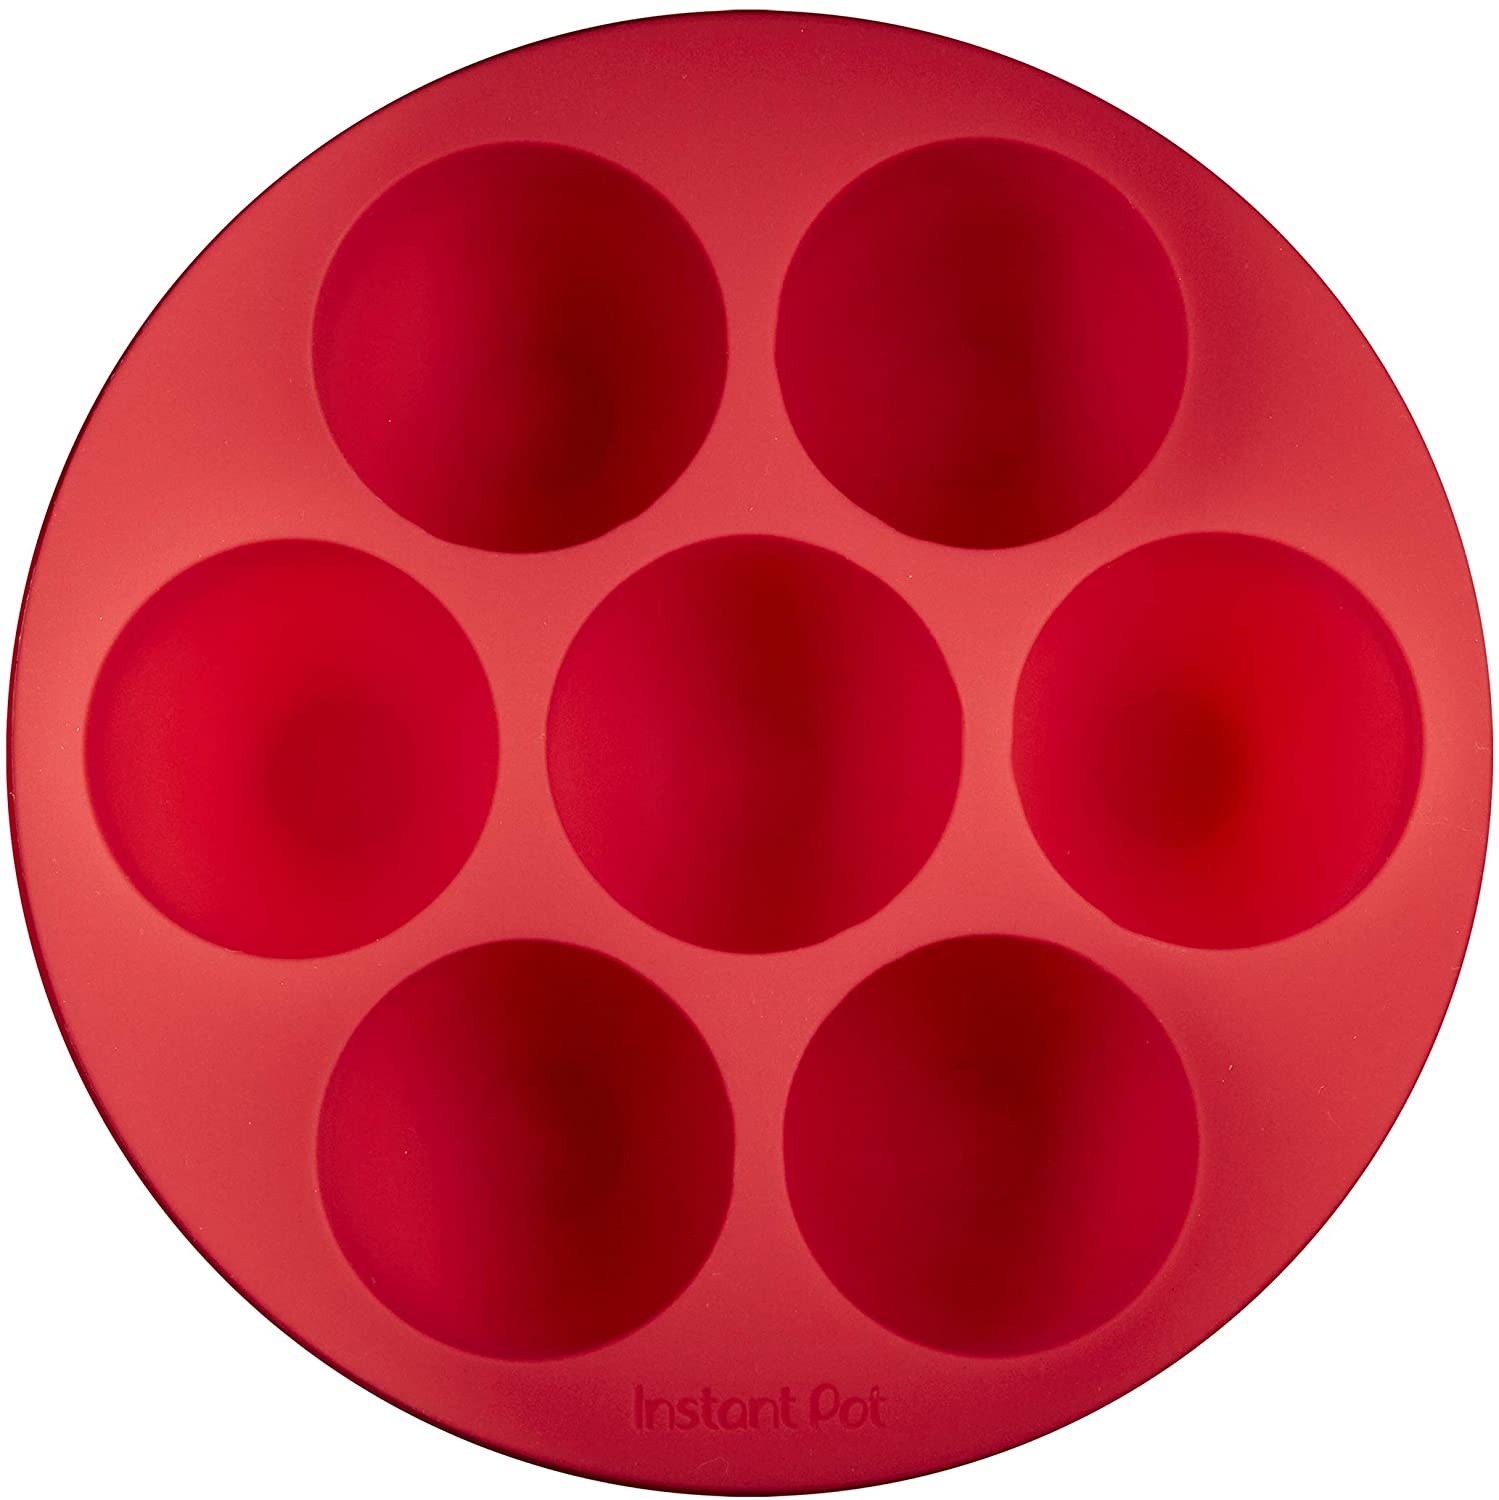 red silicone pan with 7 cups in it